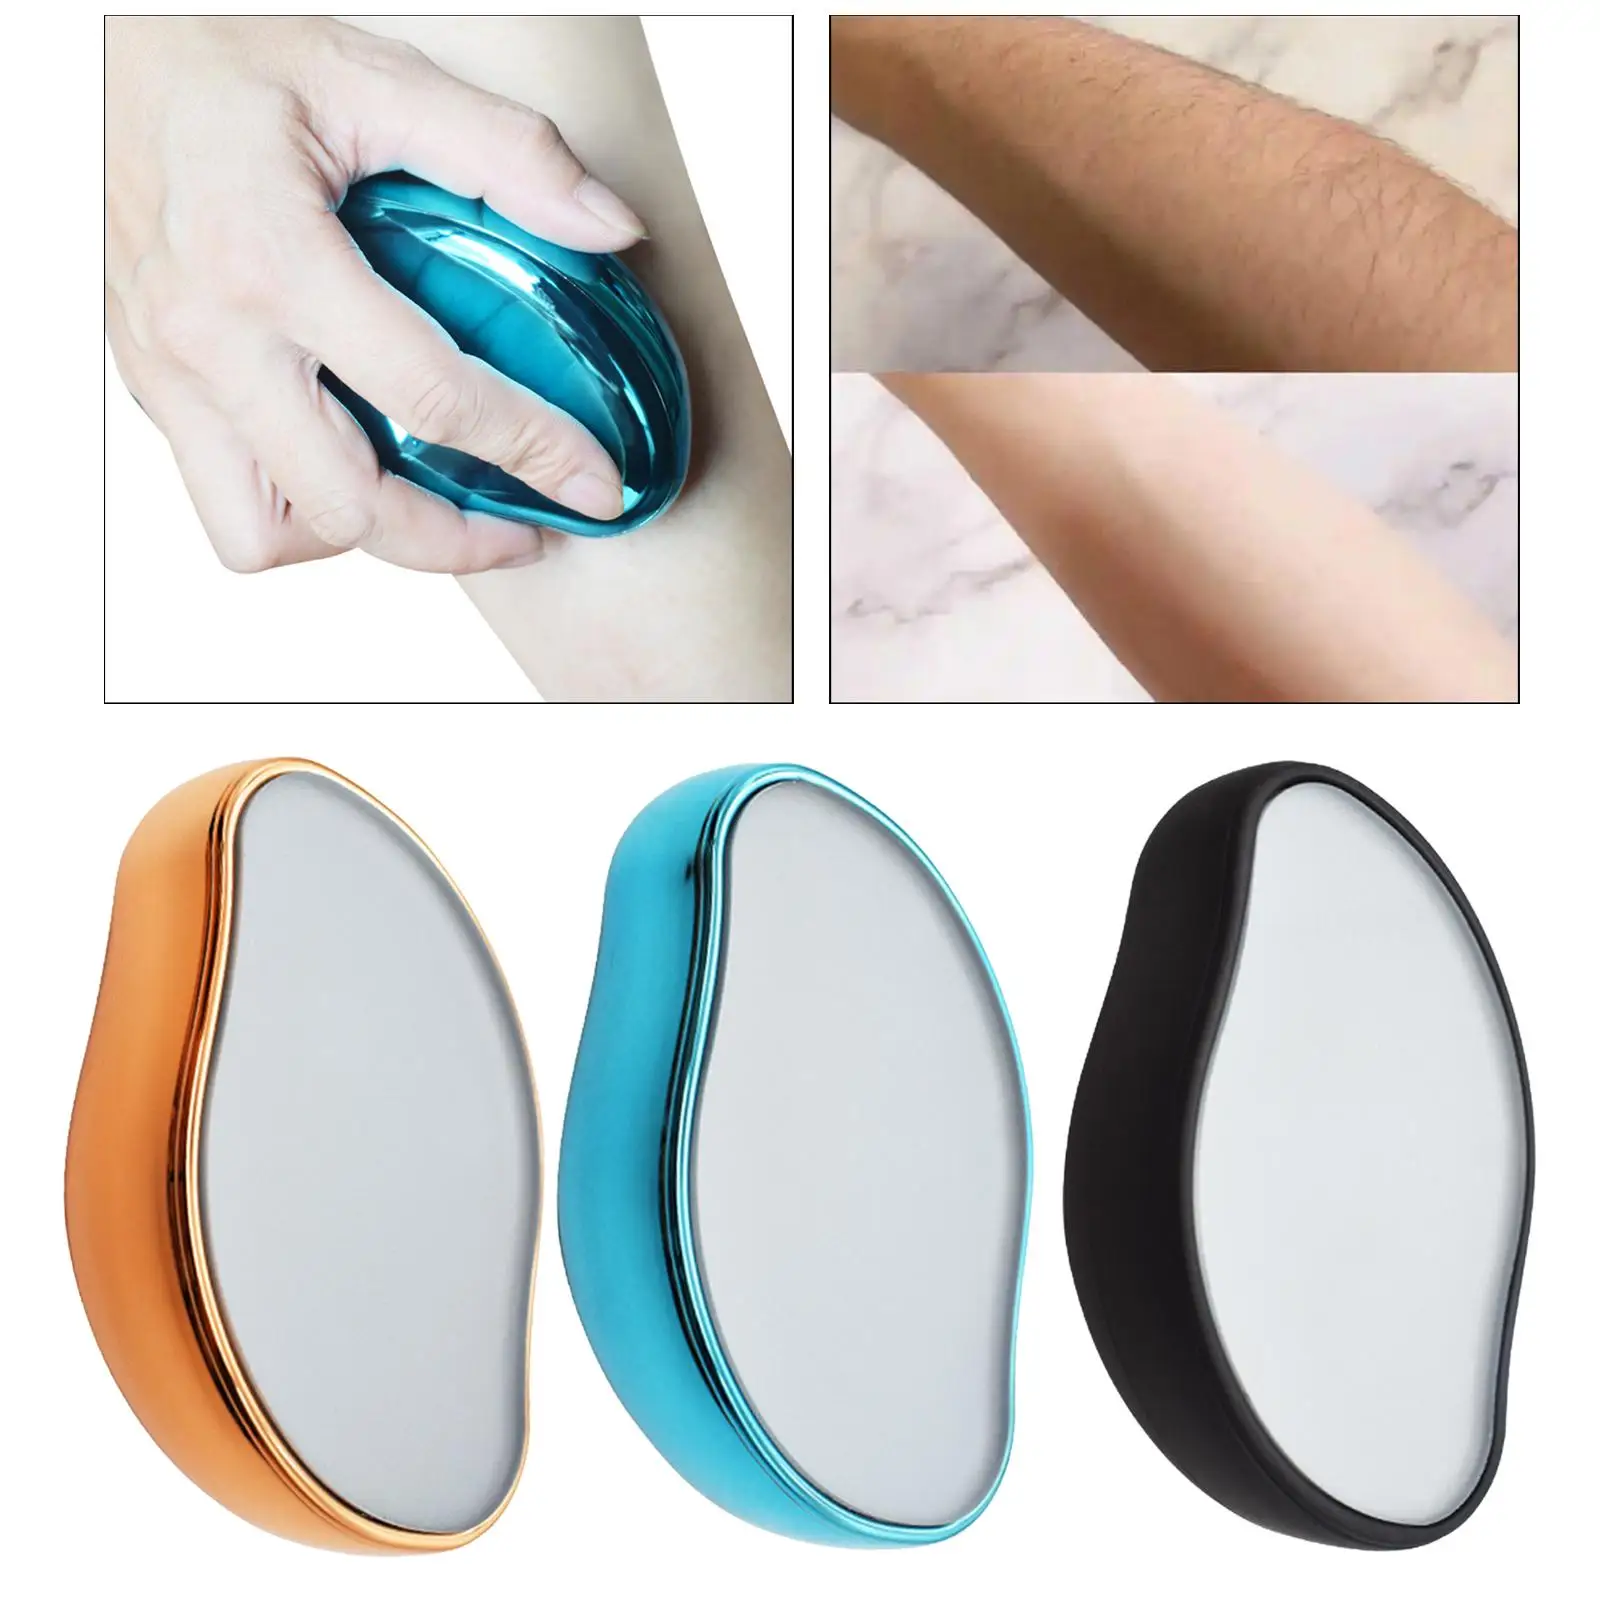 Hair Removal Epilators Depilation Exfoliating Tool Painless Physical Hair Remover for Body Leg Arm Easy to Use Hair Removal